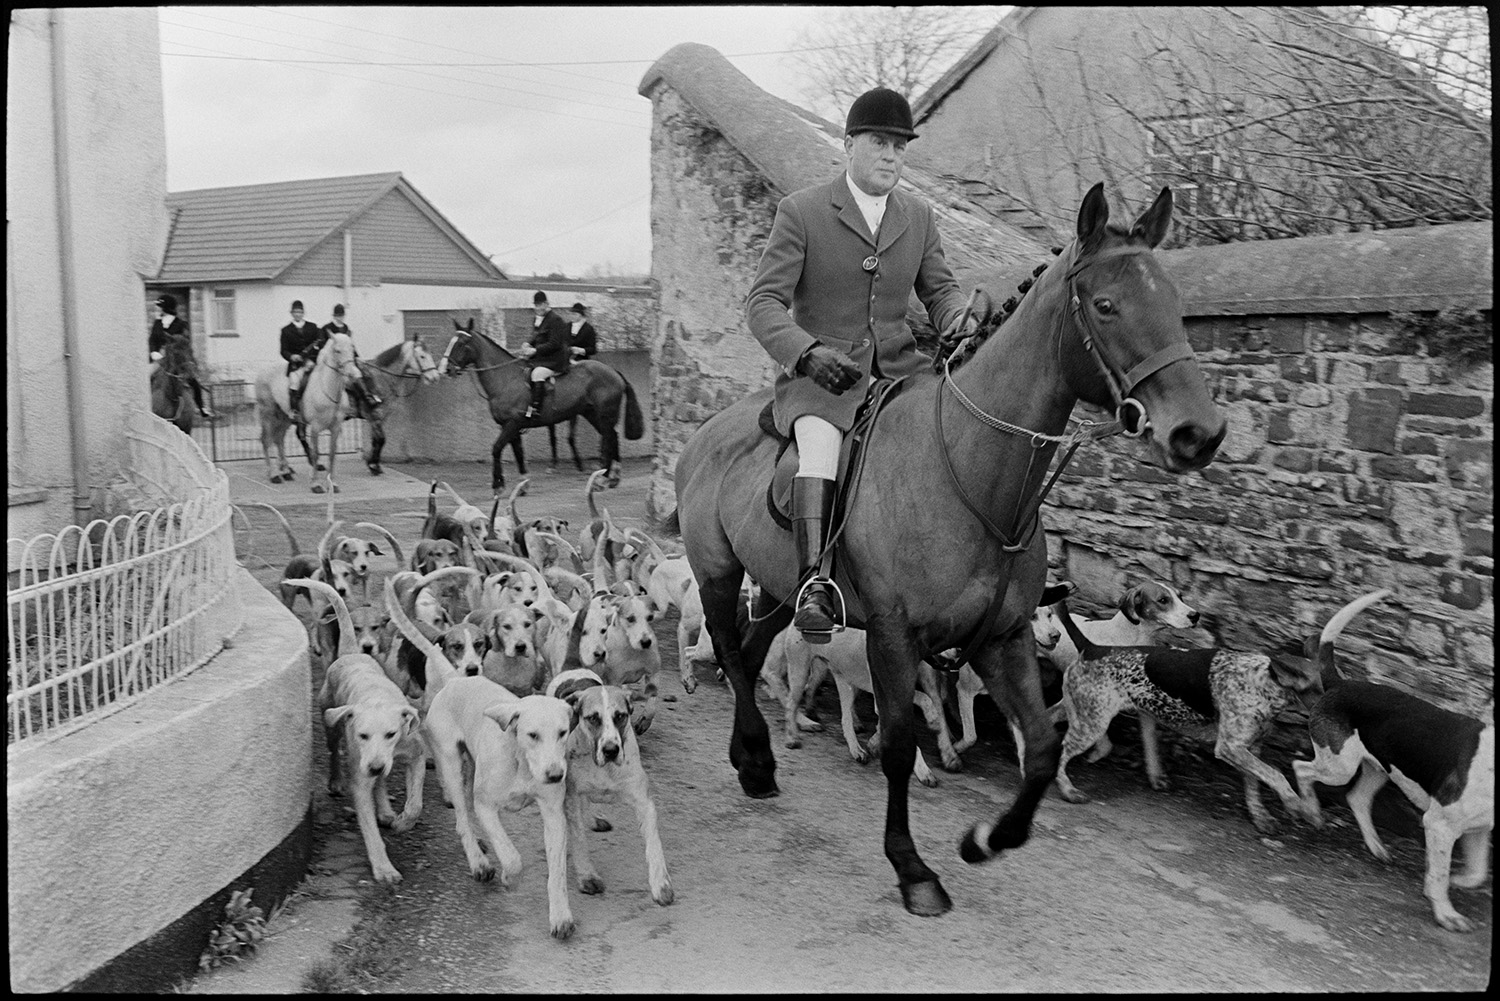 Hunt meet at house, followers and riders waiting, master, hounds setting off through village.
[Hunt Master mounted on a horse and surrounded by a pack of hounds leading the hunt off along a street through Dolton. In the background are five mounted members of the hunt.]